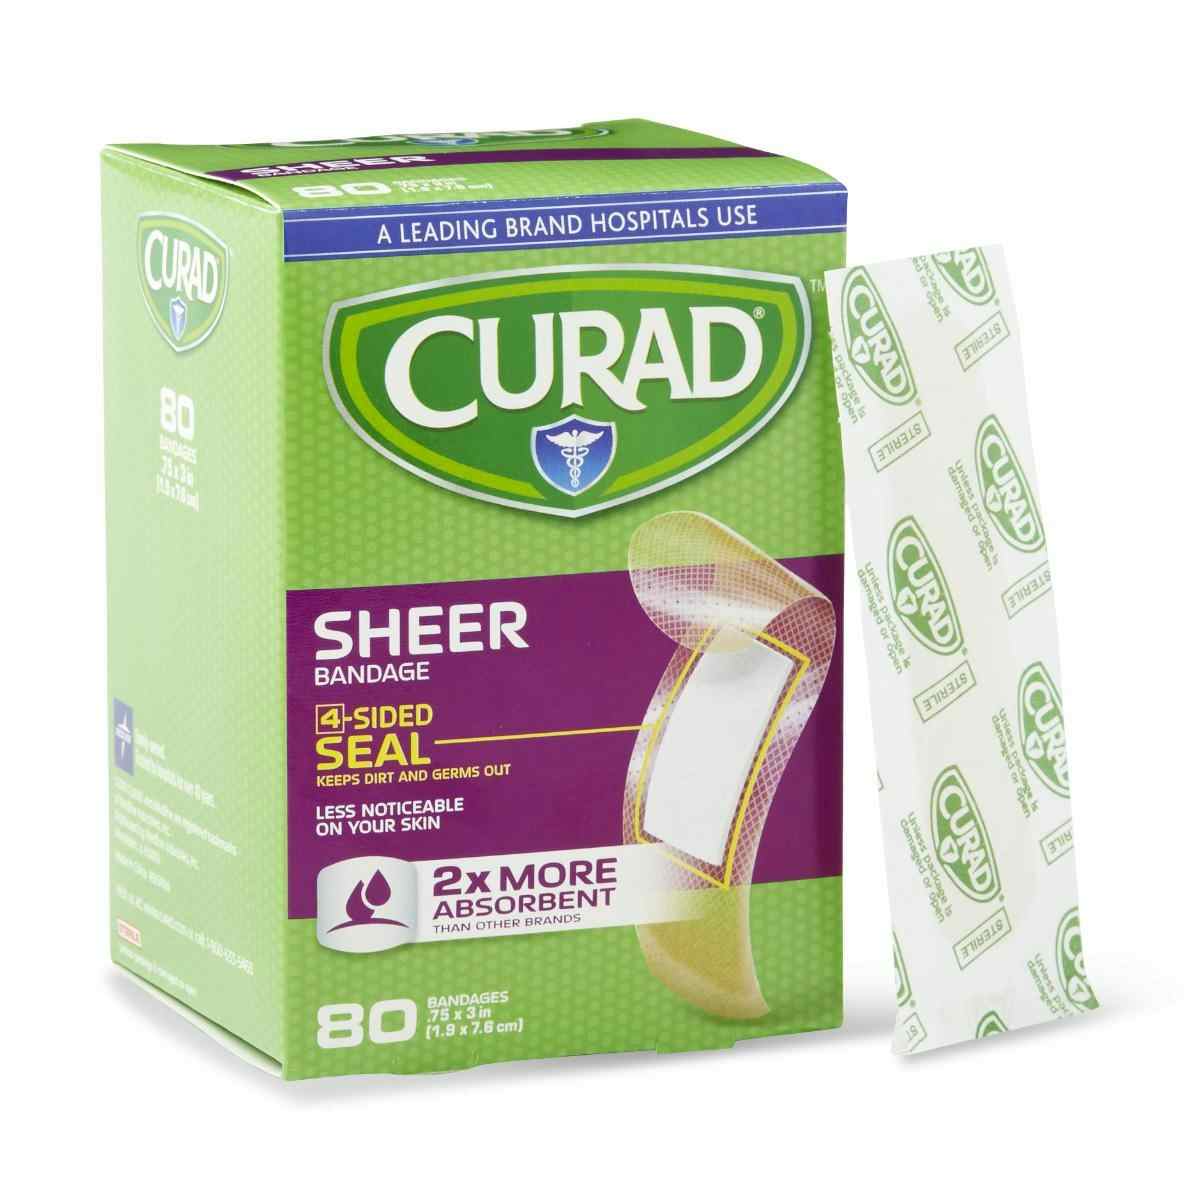 Curad Sheer Adhesive Bandages, CUR02279RB, 3/4" X 3" - Case of 24